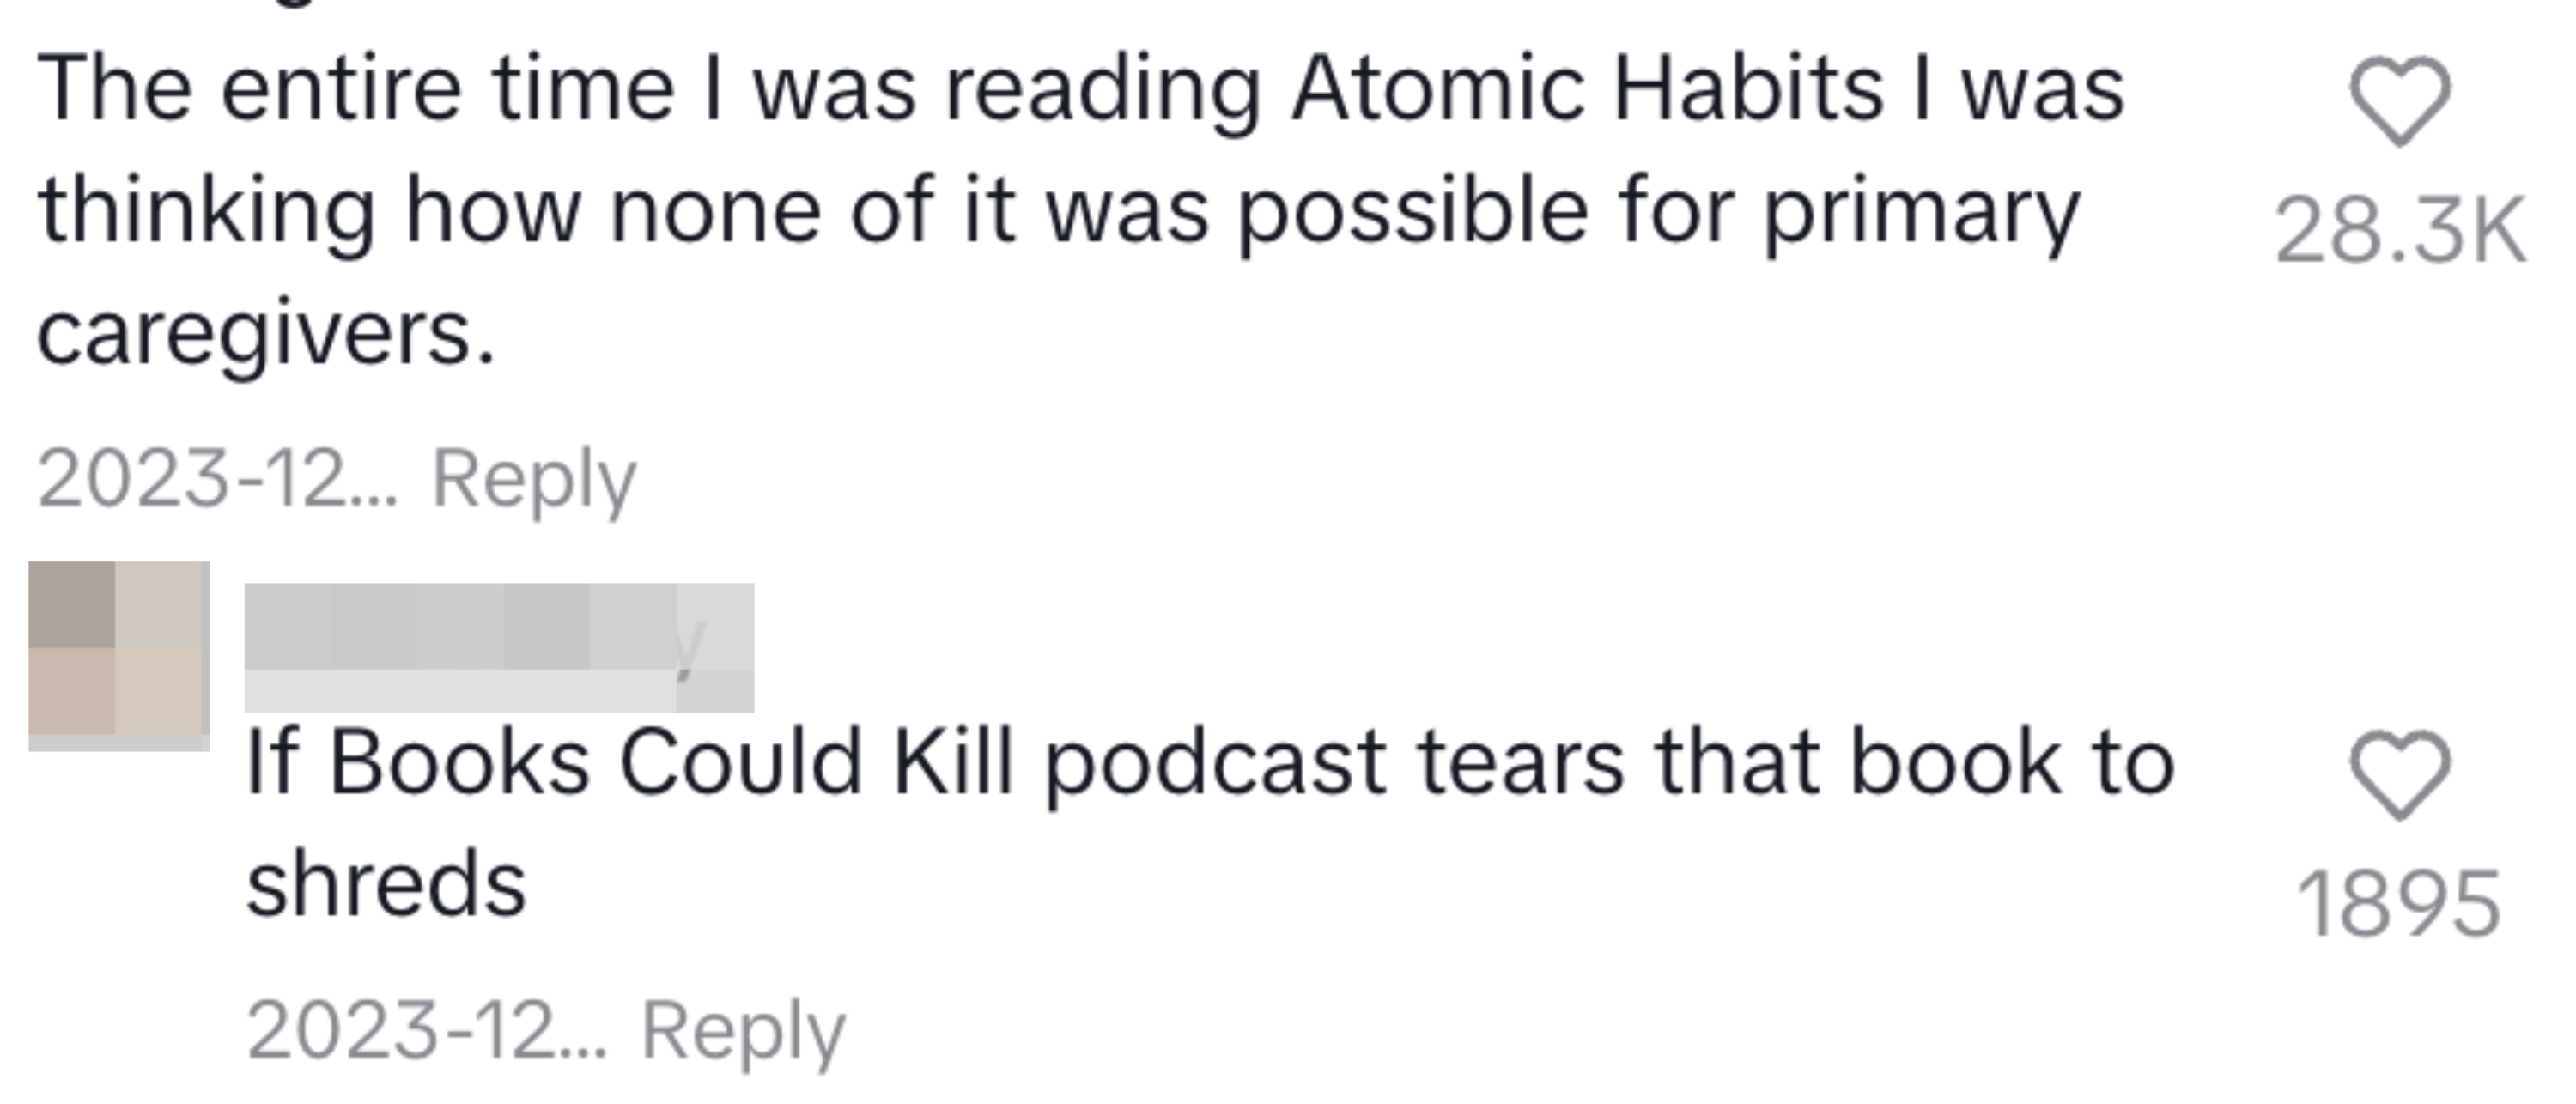 &quot;The entire time I was reading Atomic Habits I was thinking how none of it was possible for primary caregivers&quot; and &quot;If Books Could Kill podcast tears that book to shreds&quot;